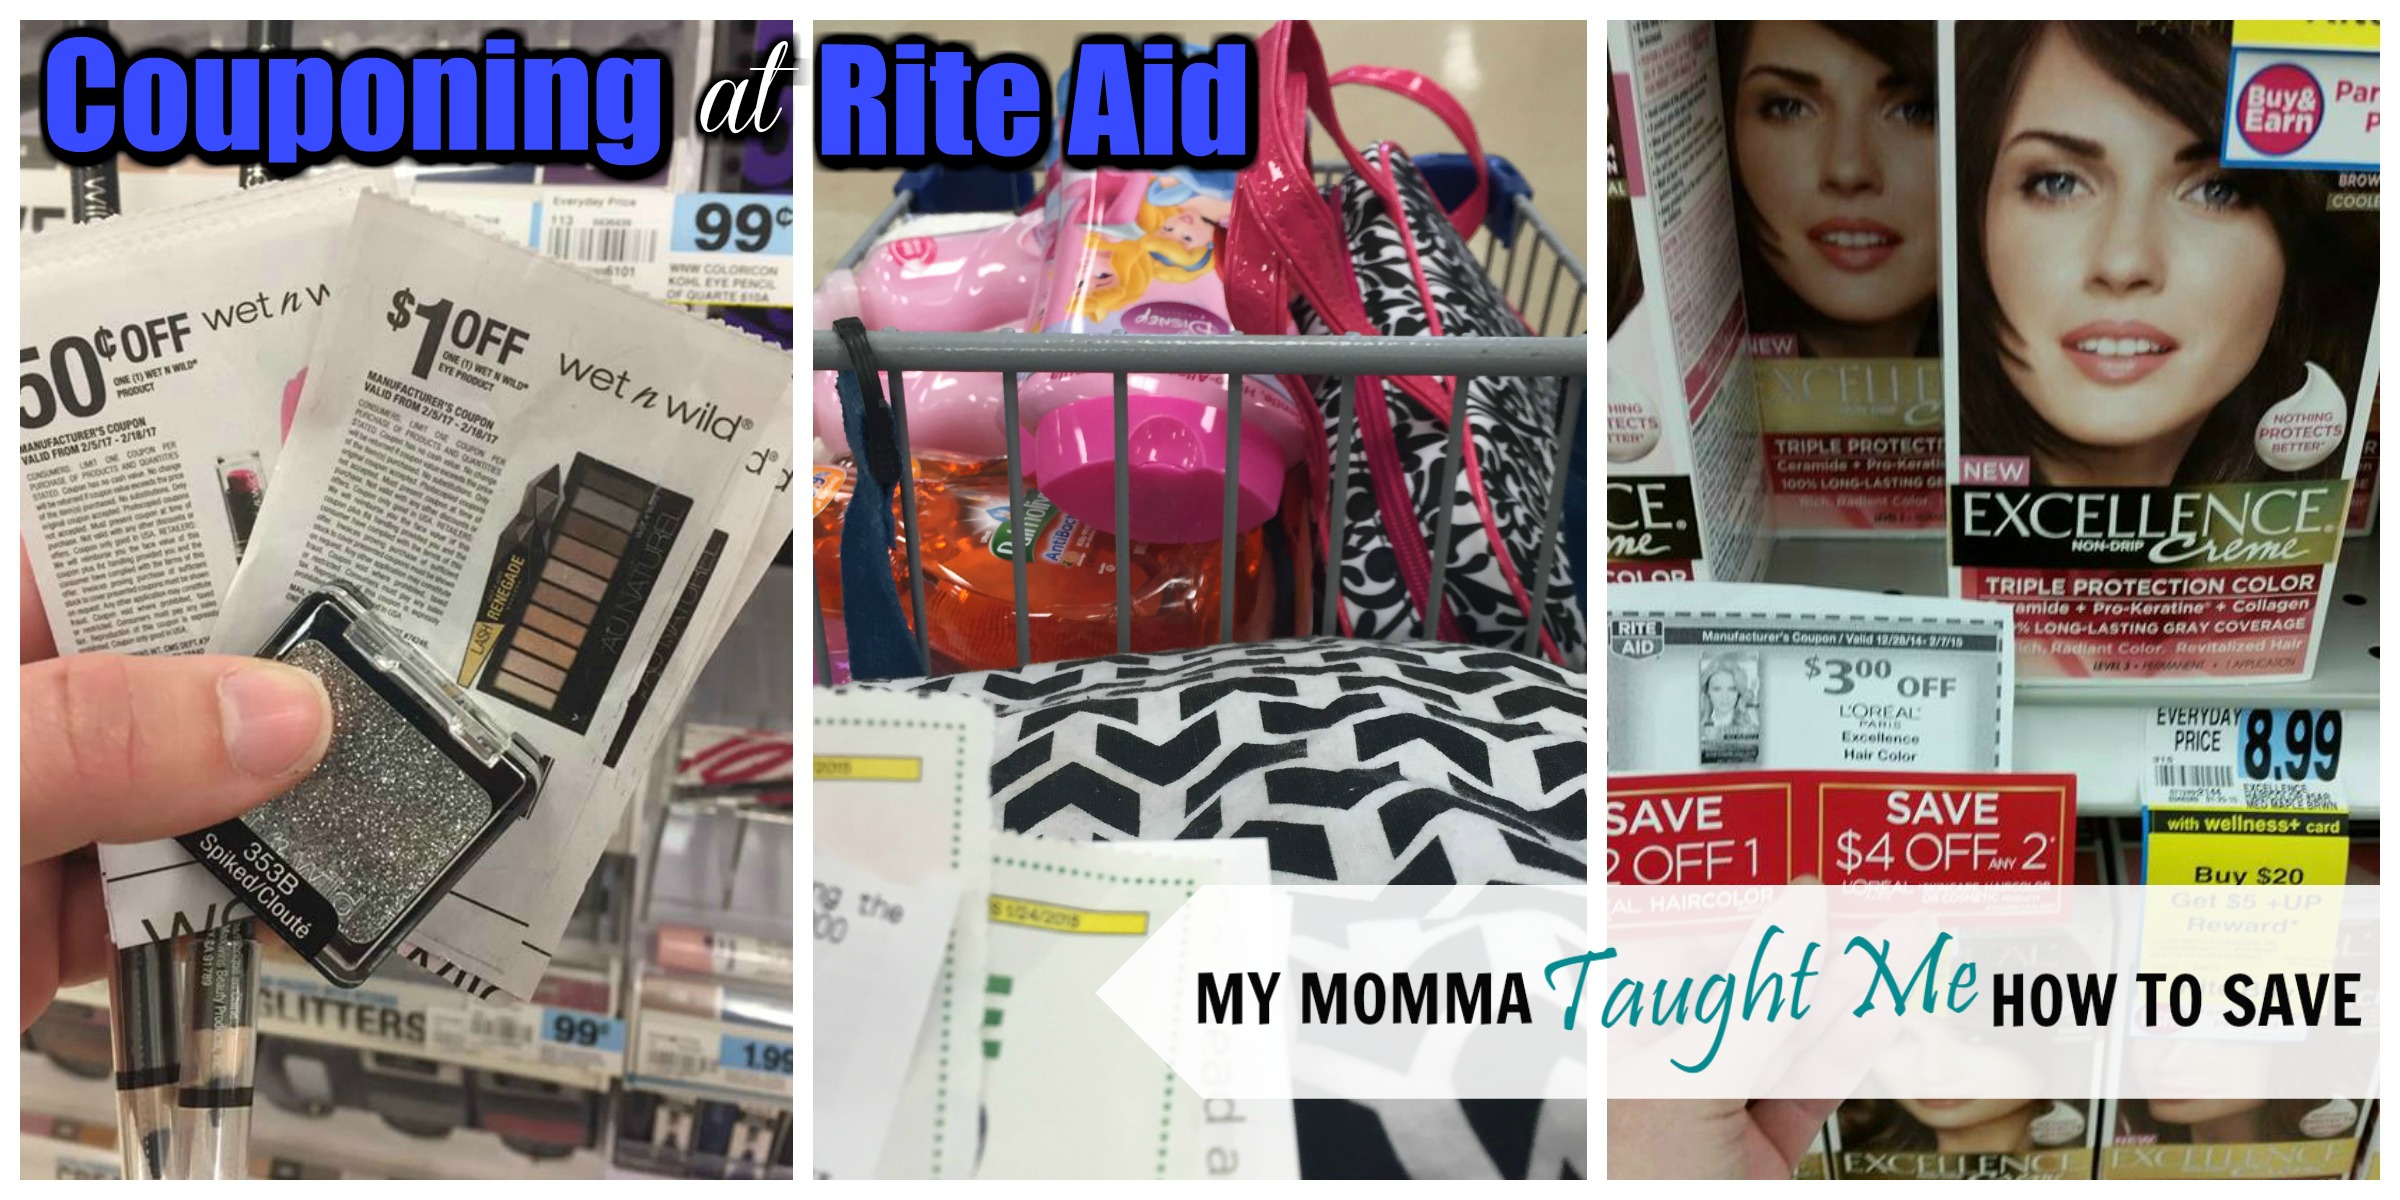 Couponing At Rite Aid With My Momma Taught Me